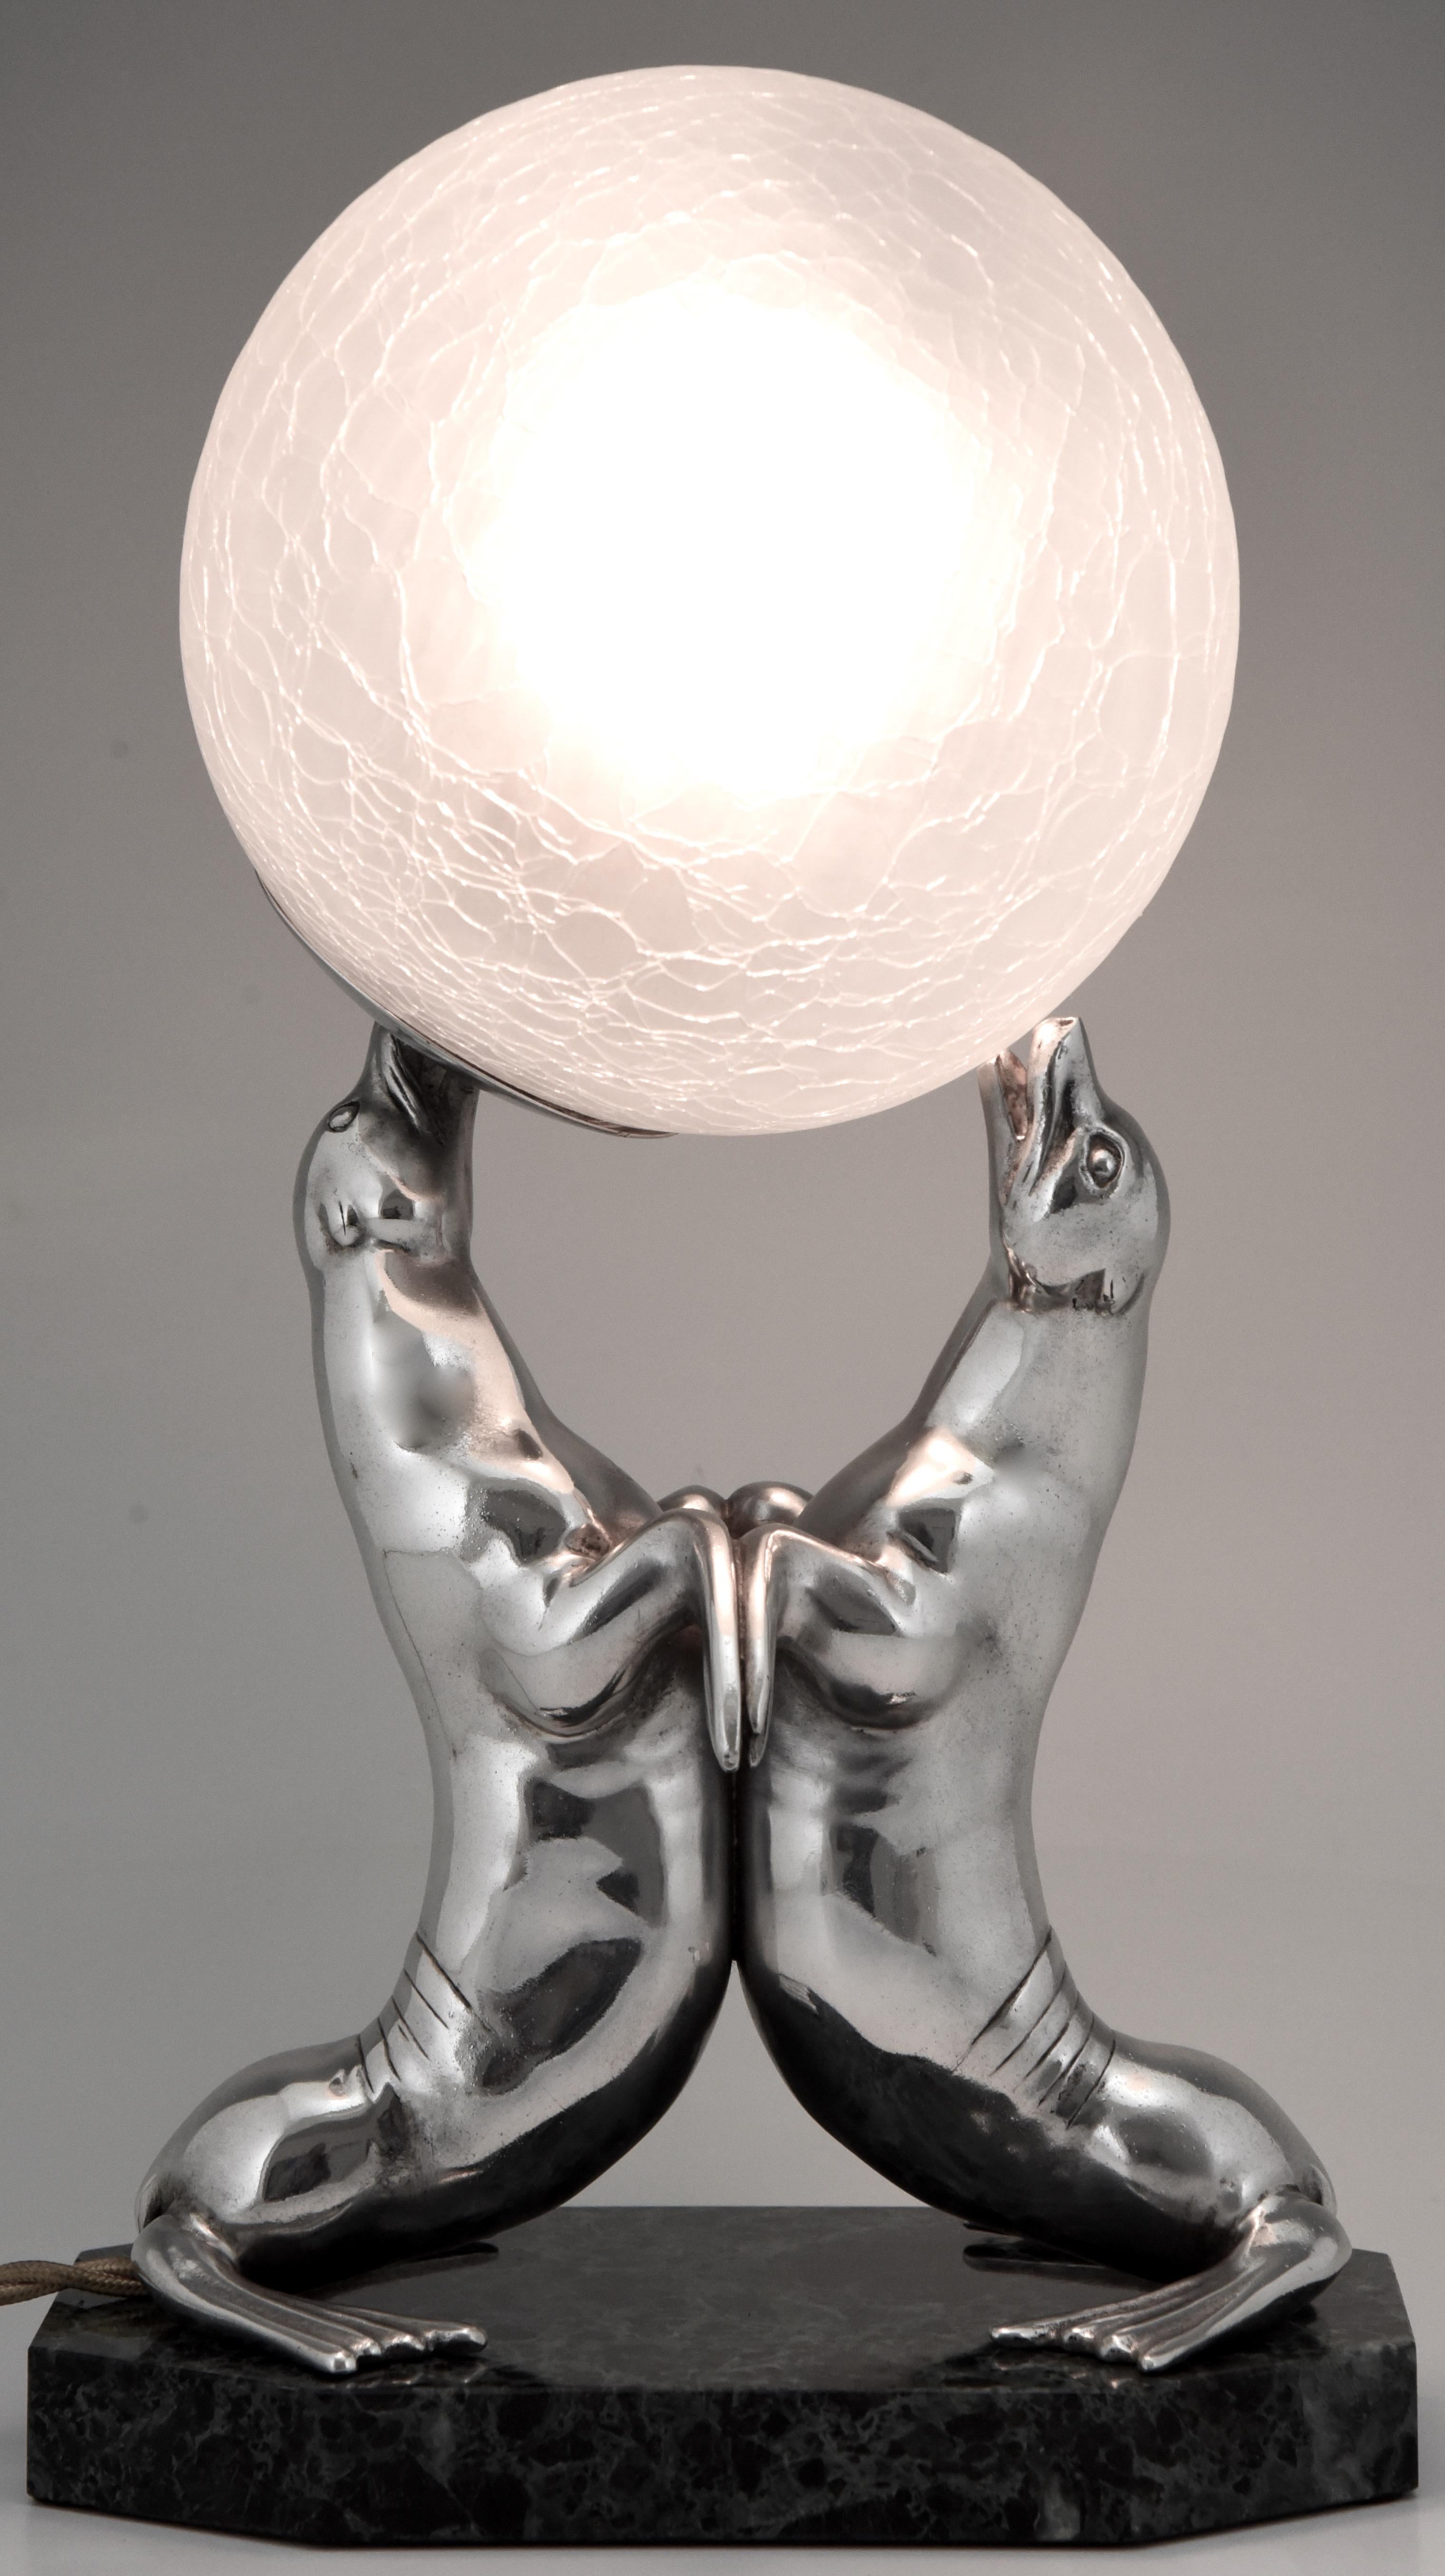 Lovely silvered Art Deco lamp of two seals playing with a ball by the French sculptor Louis Albert Carvin. The lamp stands on a green marble base and has a crackle glass shade. France, 1930. “Animals in bronze” by Christopher Payne. Antique